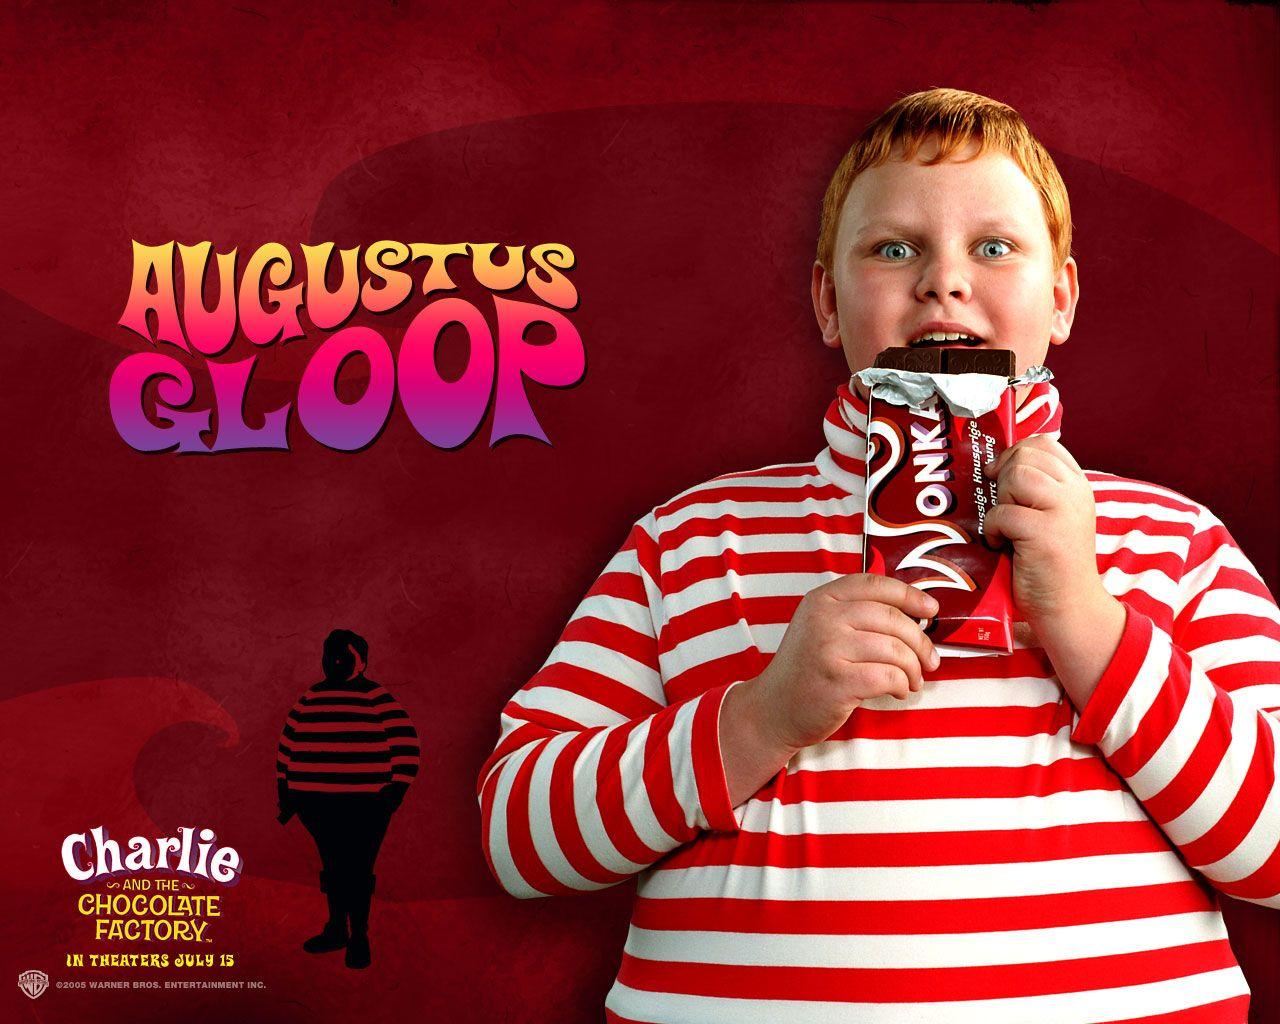 Charlie and the Chocolate Factory Wallpaper - 1280x1024